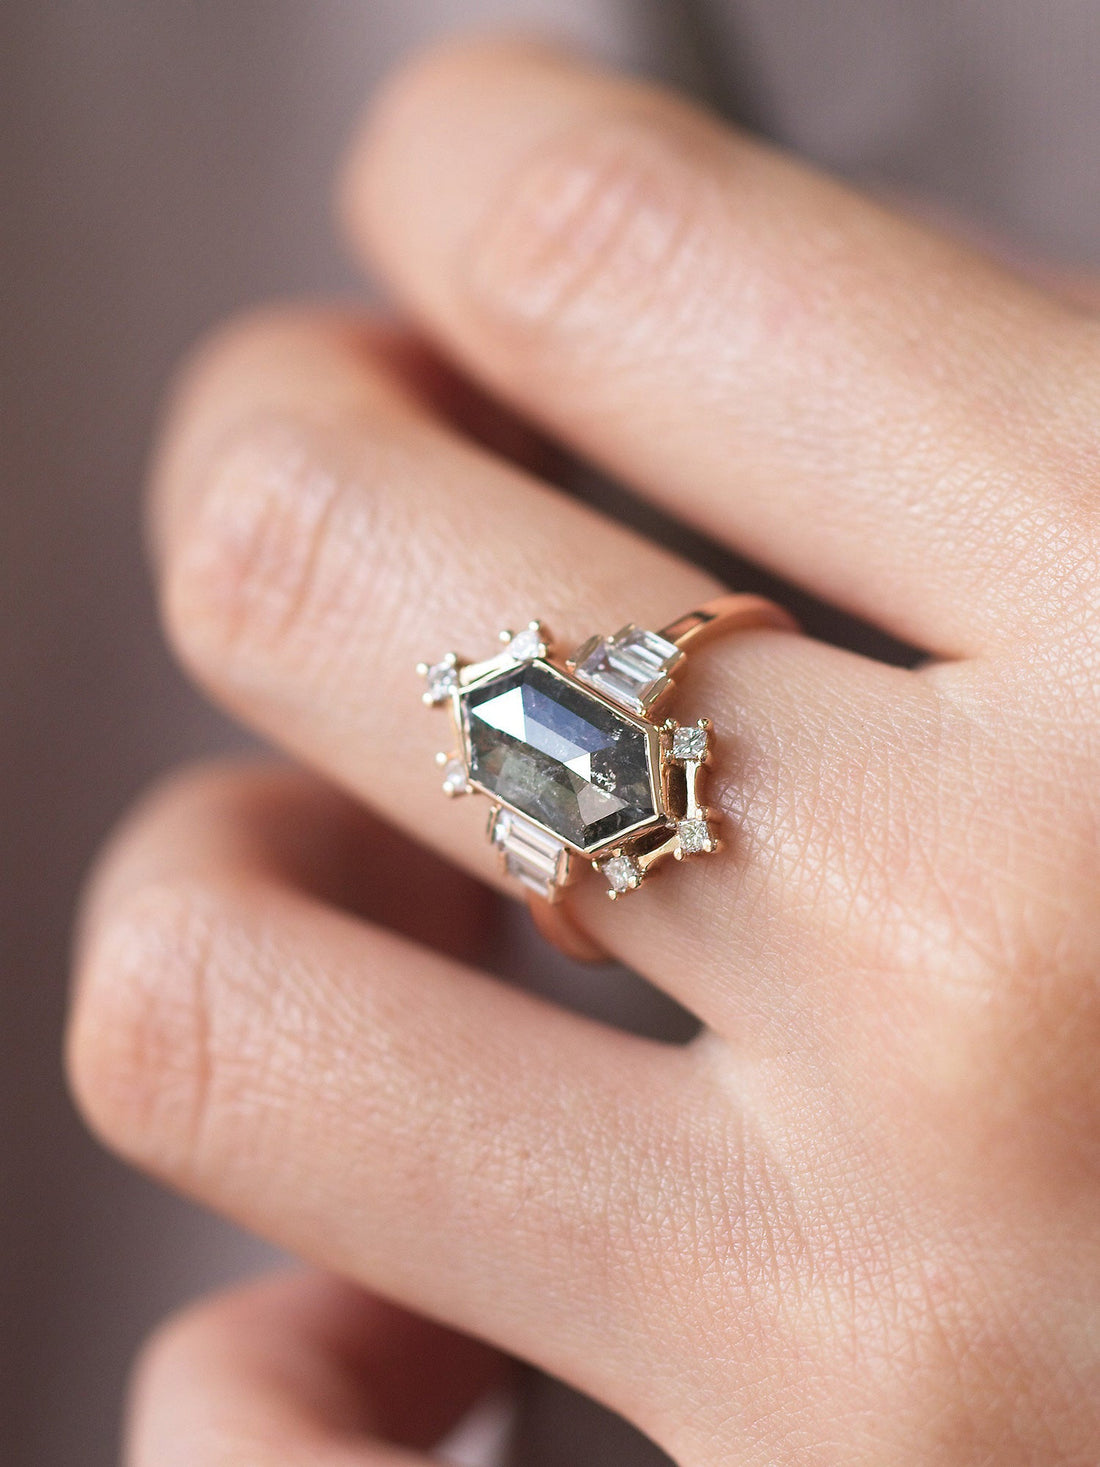 Minimalistic and art deco styled hexagon salt and pepper diamond engagement ring in 14k rose gold with princess and baguette diamonds on model&